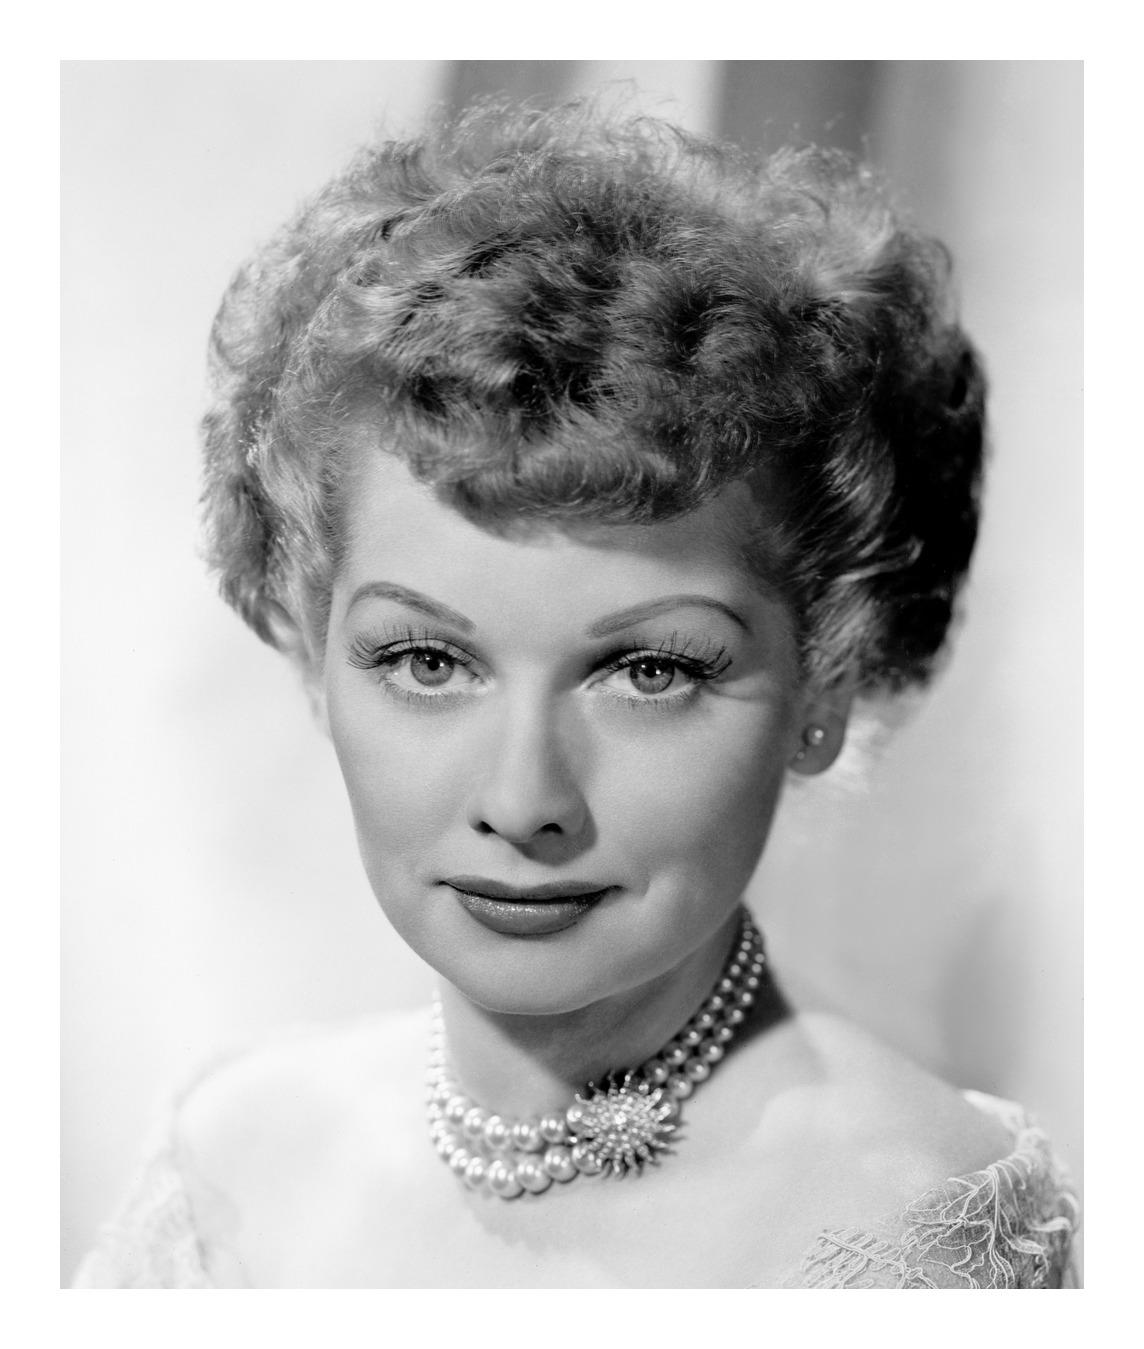 Lucille Ball in Pearls - Photograph by Unknown